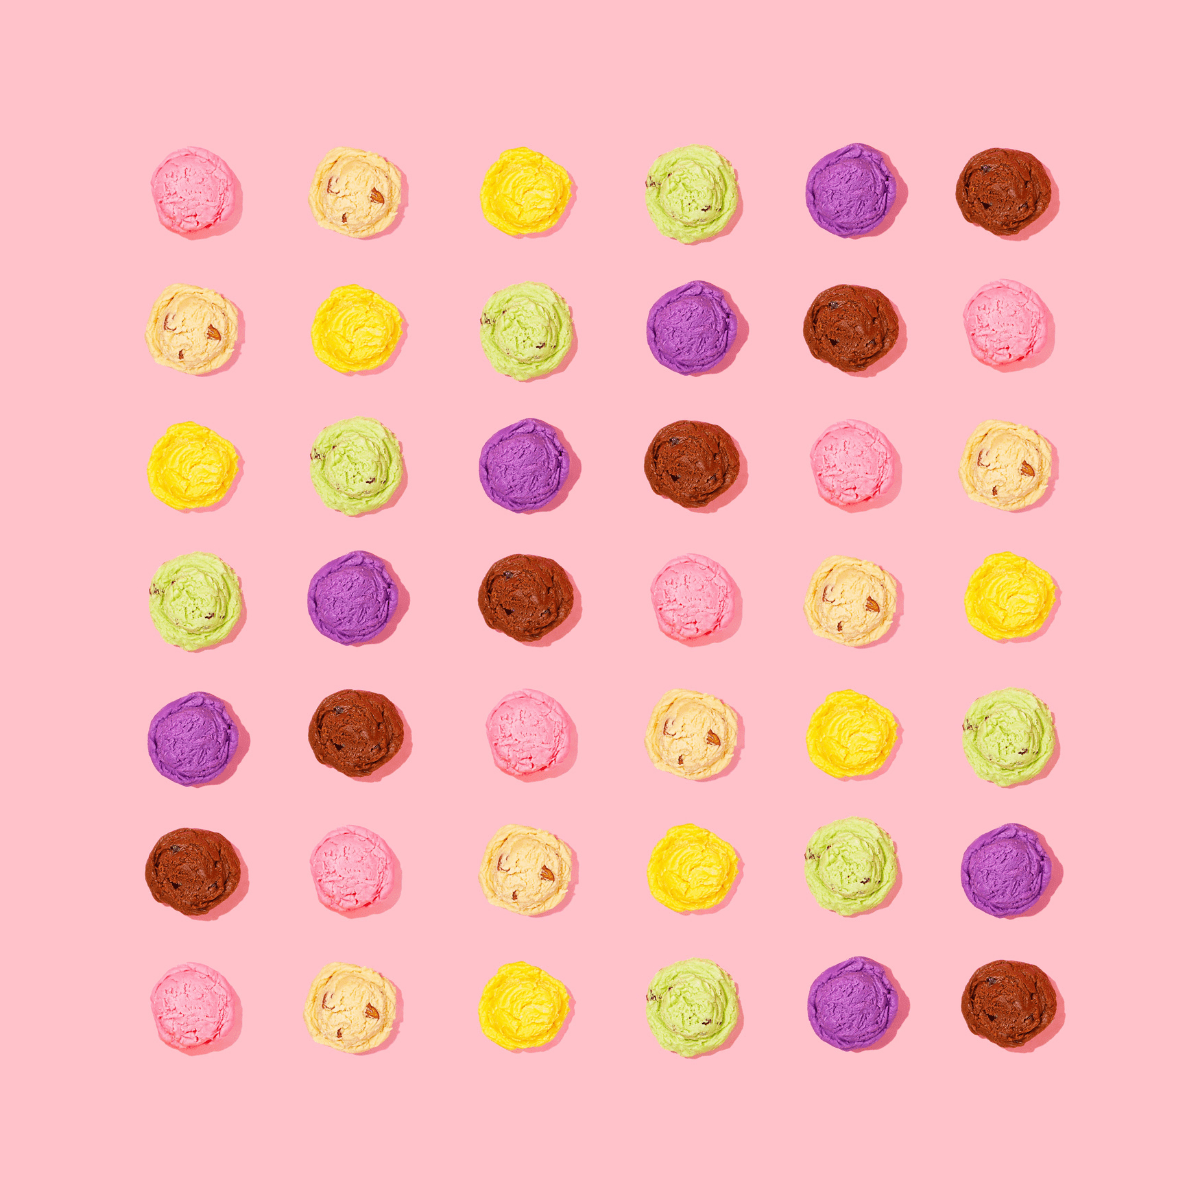 various ice cream flavors on pink background.